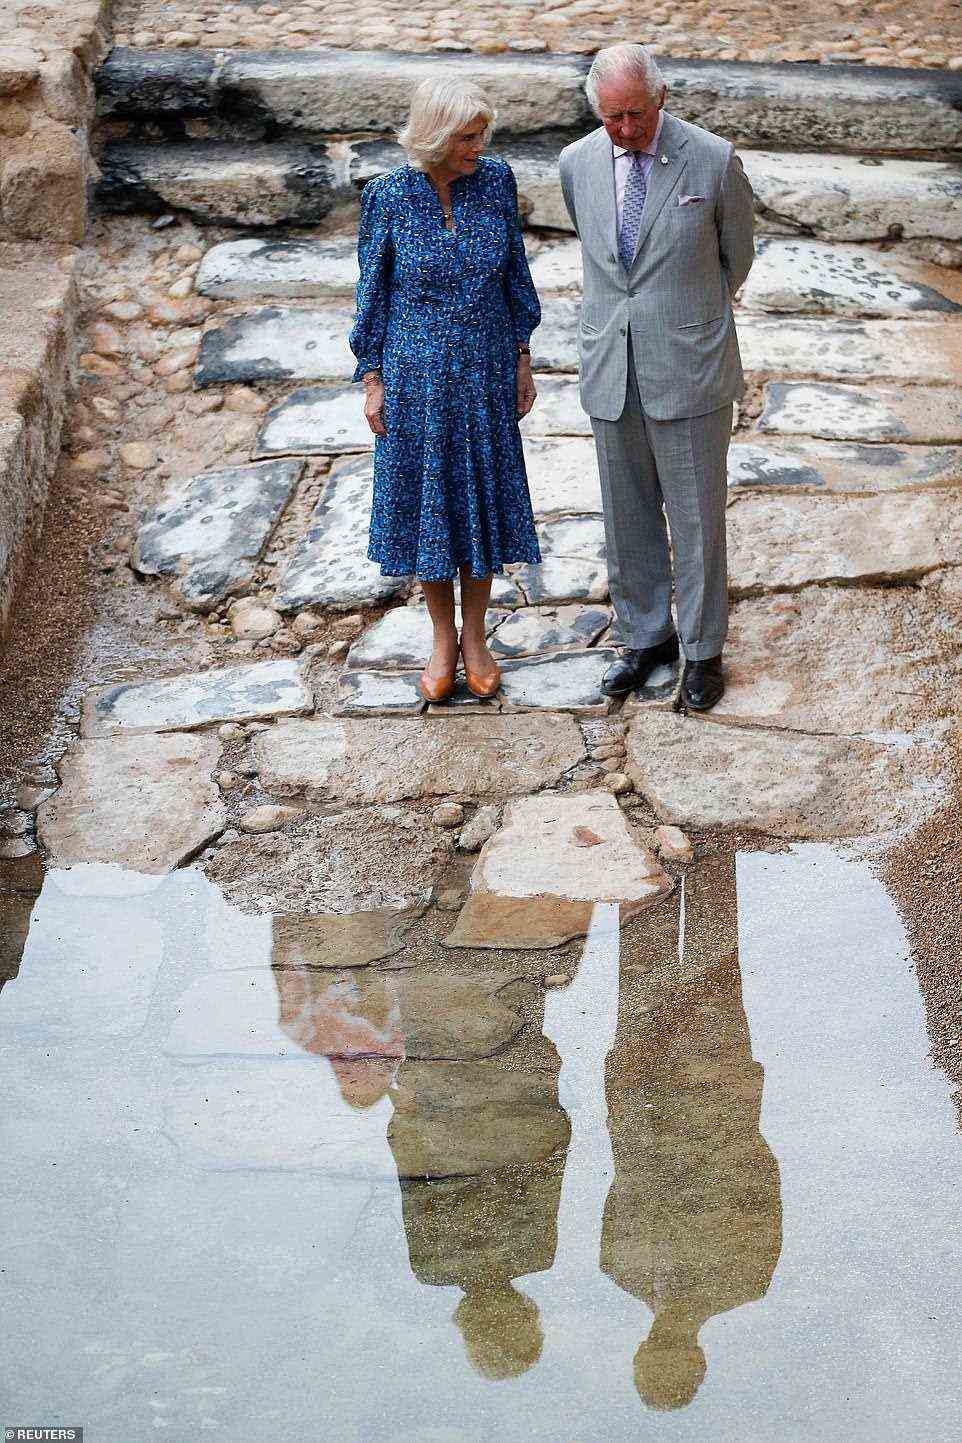 Let's take some home! The Prince of Wales and the Duchess of Cornwall dipped their fingers in water from the holy River Jordan which is used to baptise royal babies - with Charles rumoured to have requested bottles of the water to take home for future royal baptisms